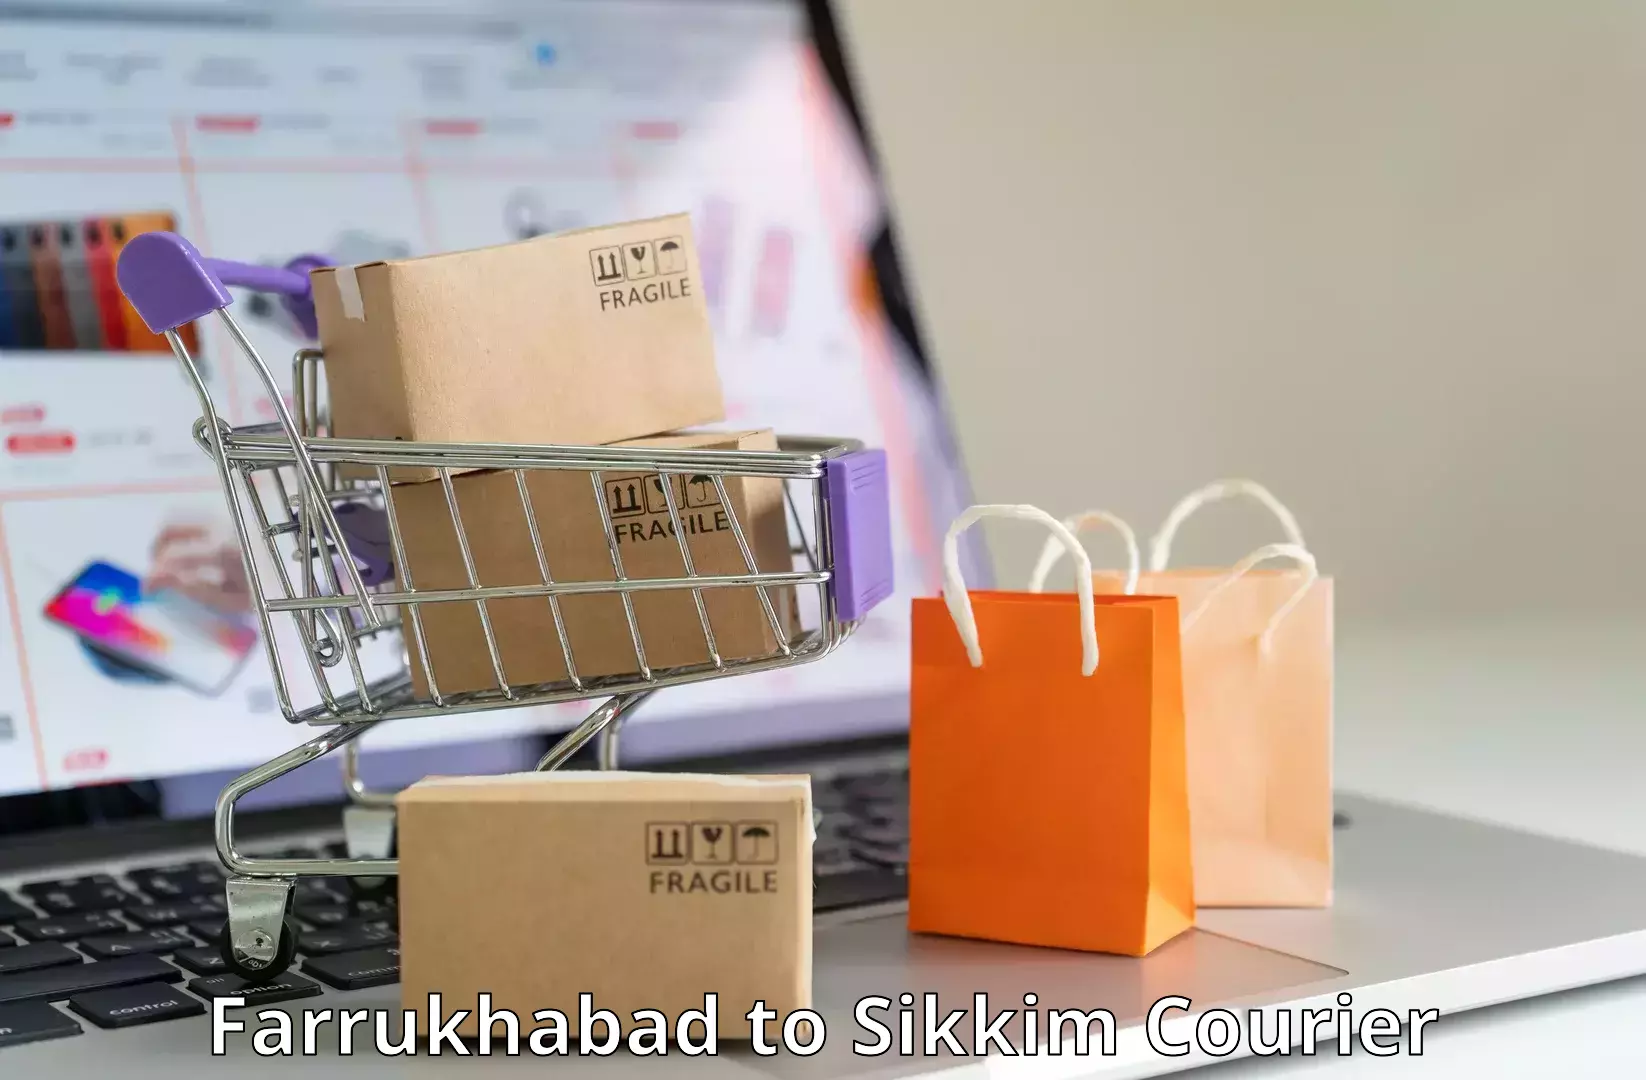 User-friendly delivery service Farrukhabad to South Sikkim